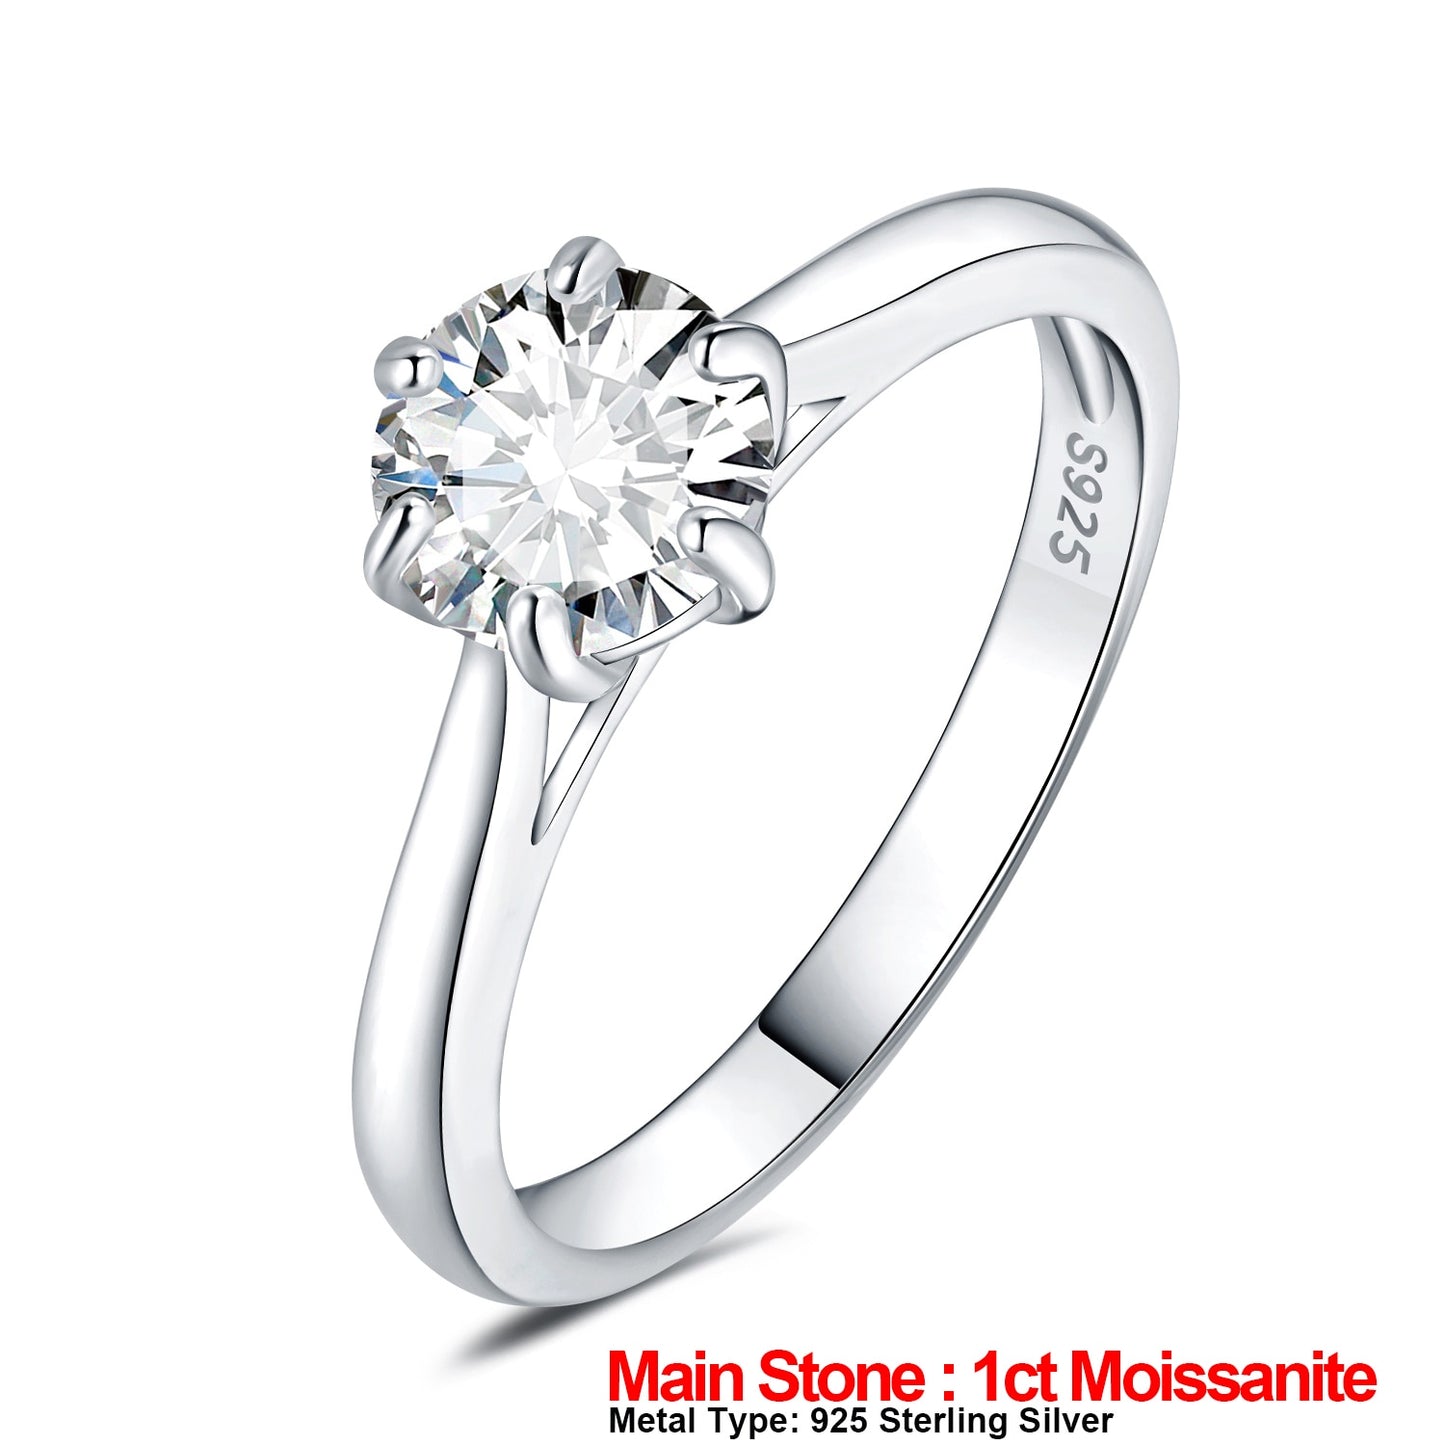 JewelryPalace Moissanite D Color 0.5ct 1ct 1.5ct 2ct Round Cut S925 Sterling Silver Solitaire Wedding Engagement Ring for Women